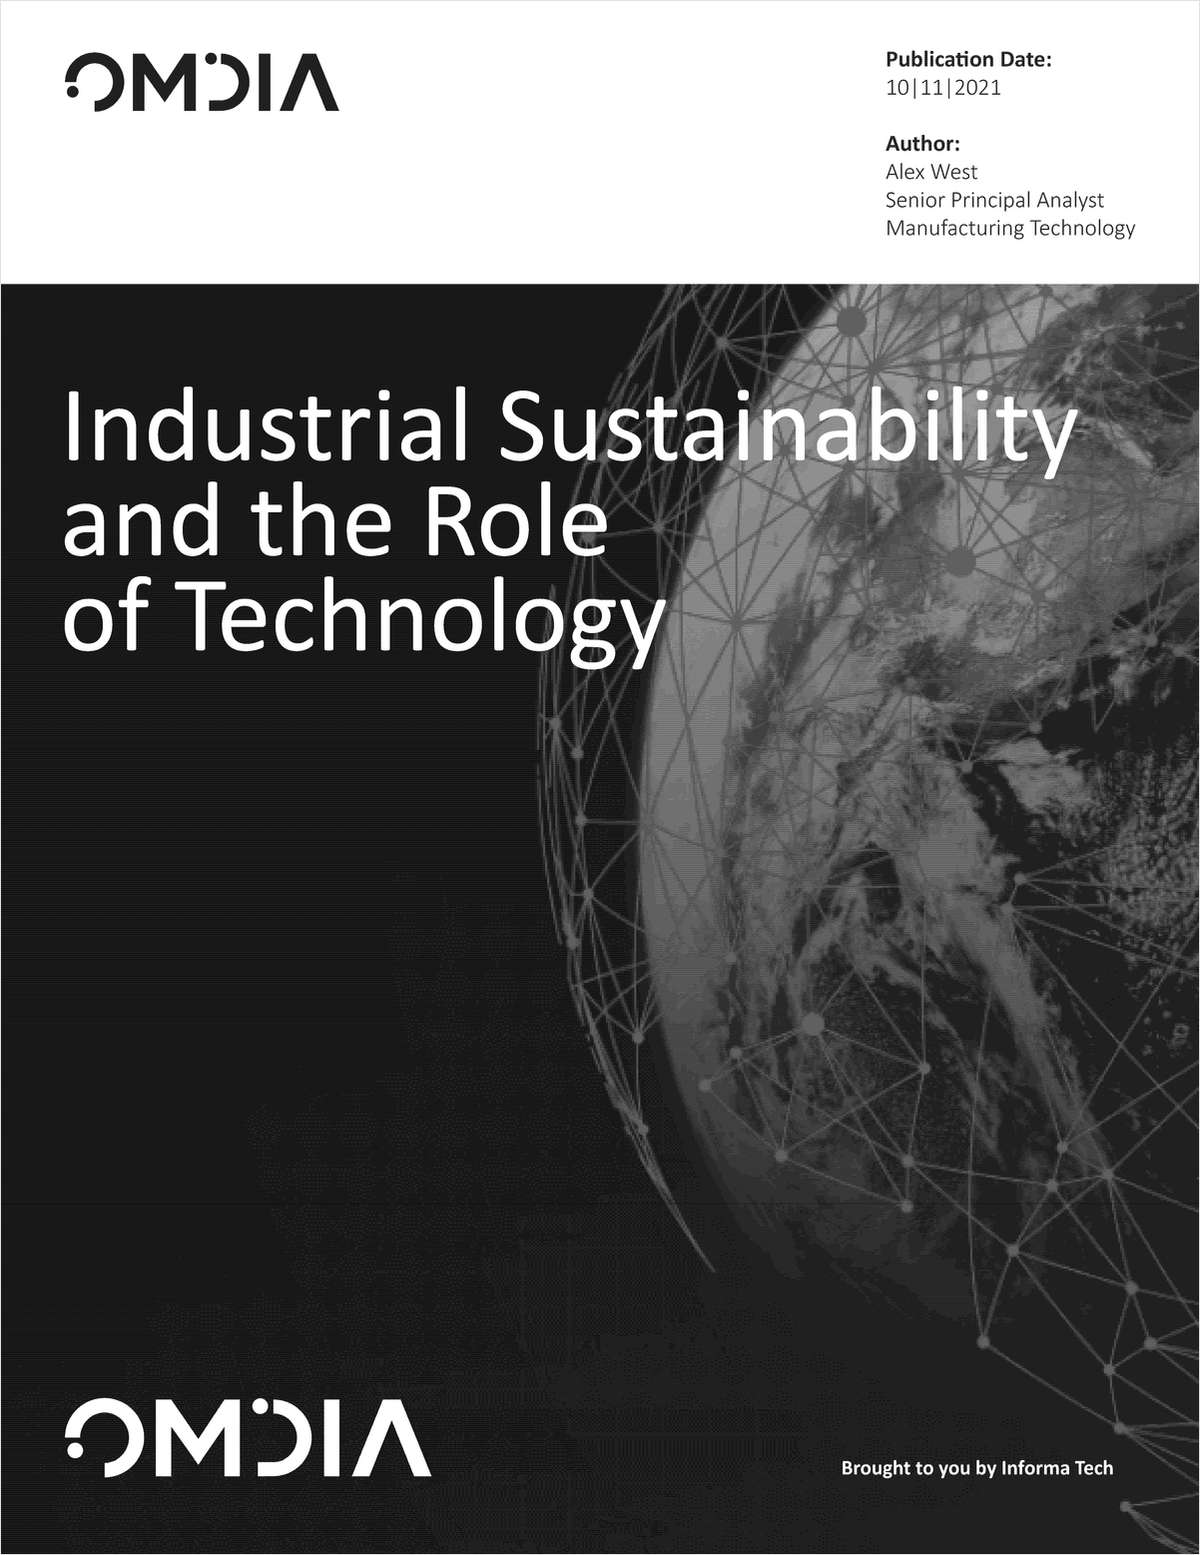 Industrial Sustainability and The Role of Technology Report